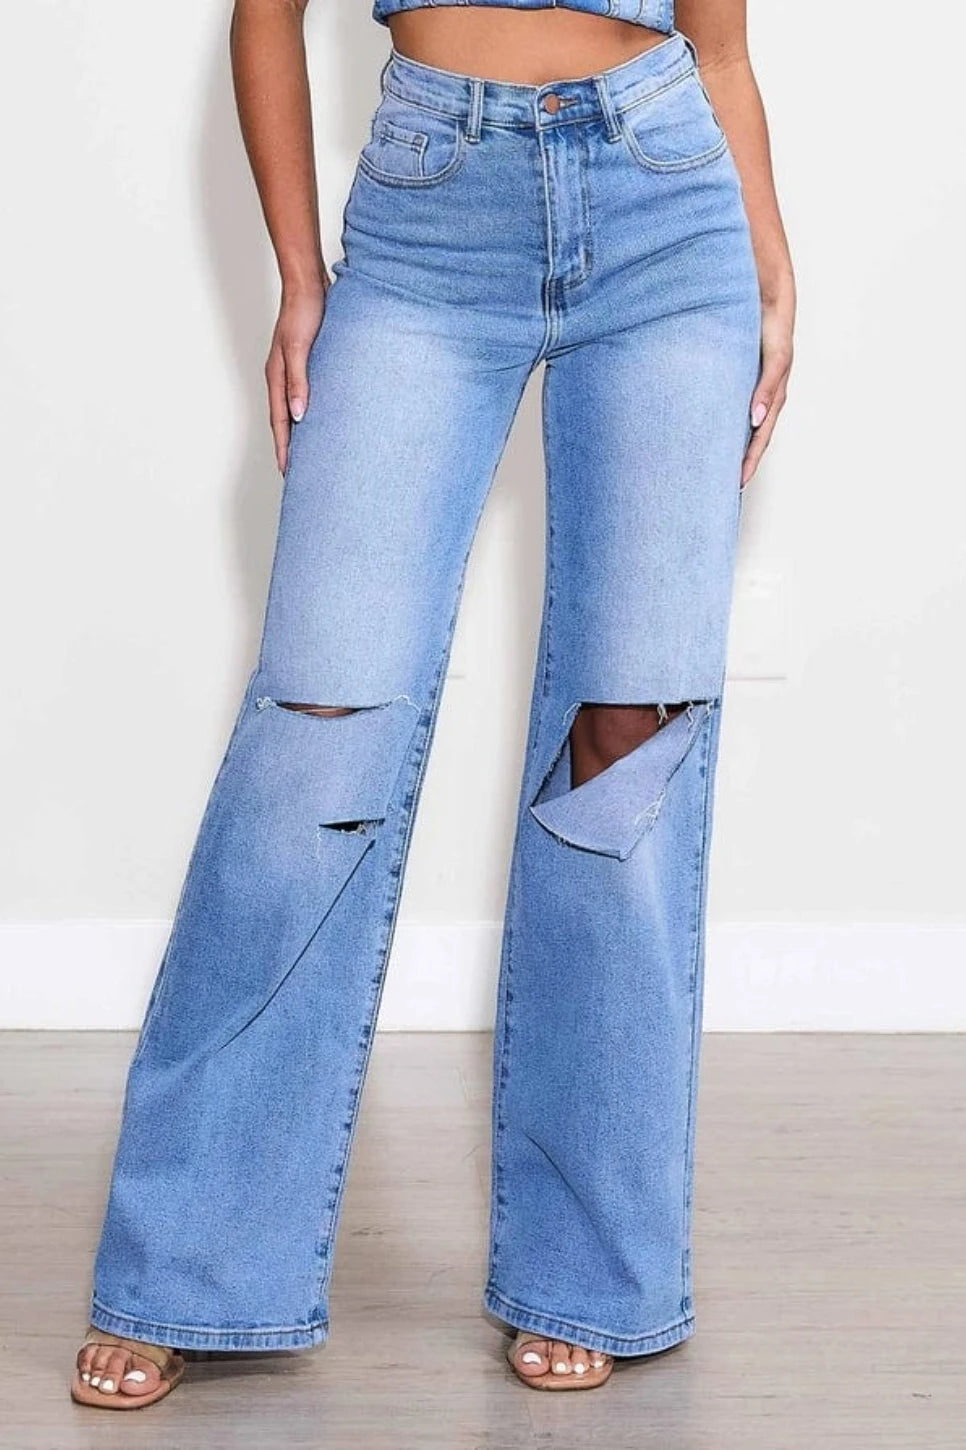 Epicplacess JEANS Ice Blue / 1 Rockstar Ripped Wide Leg Jeans for Women EP1914MS-9